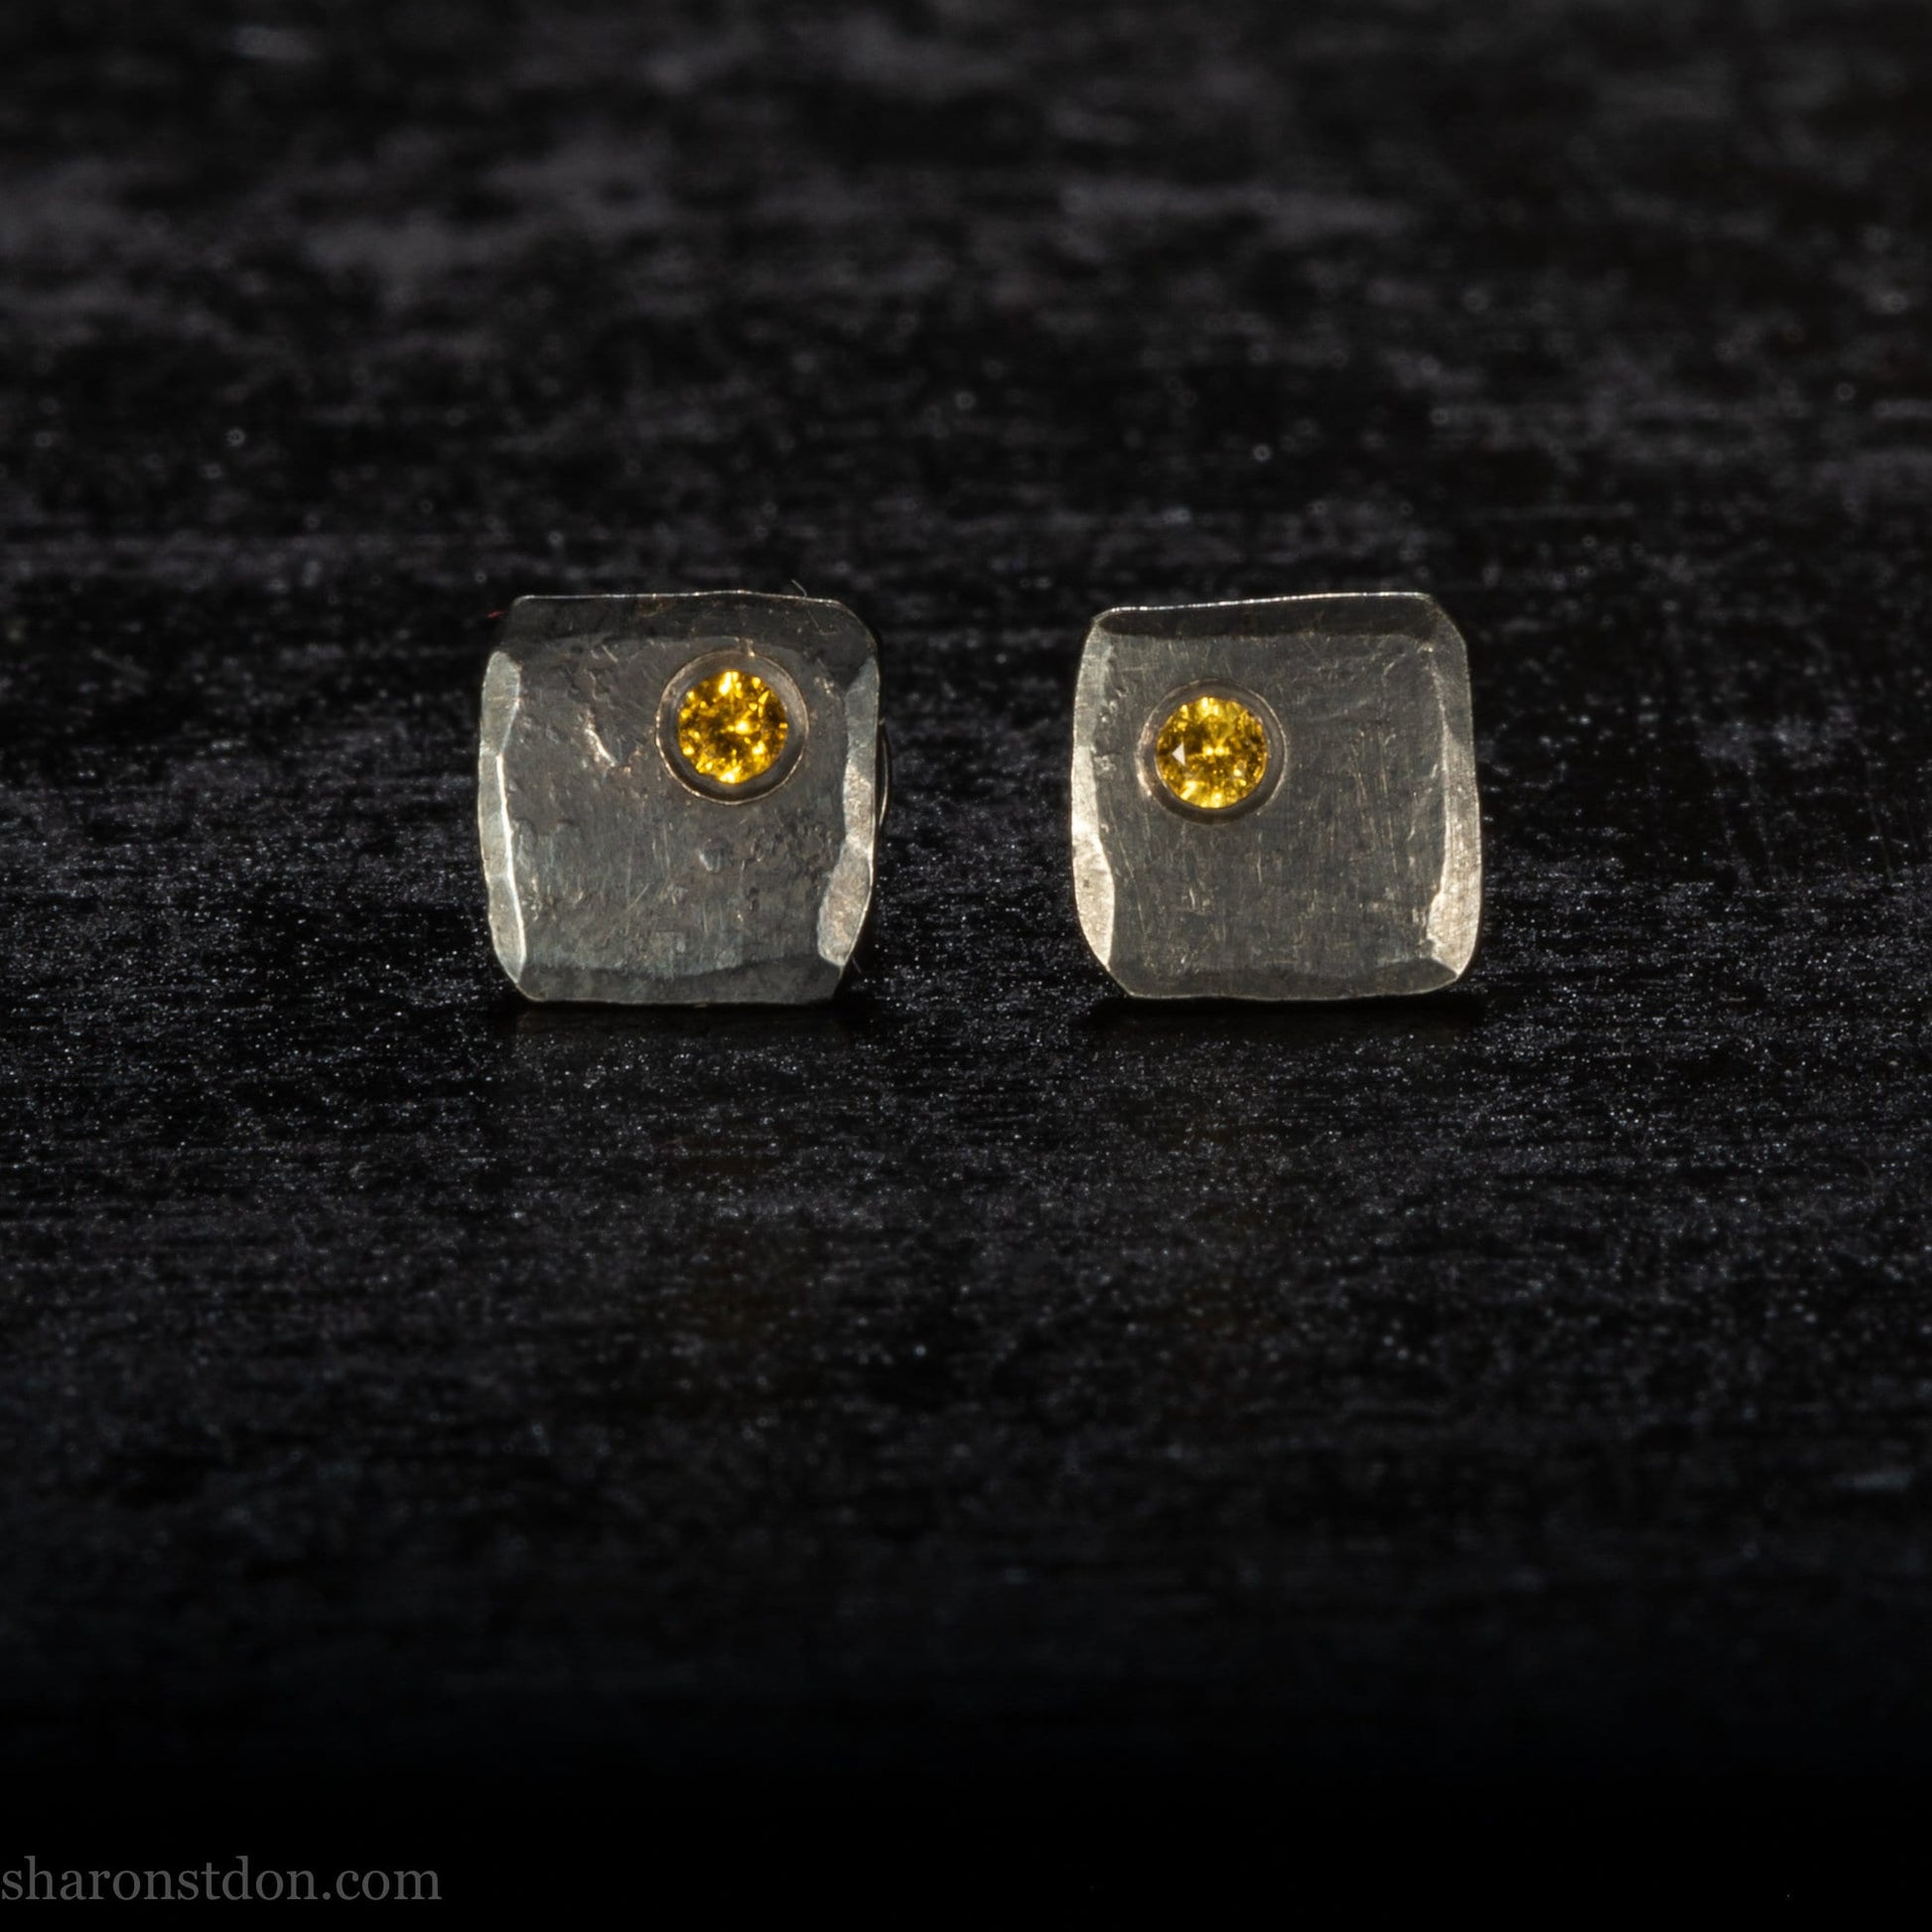 Handmade 925 sterling silver stud earrings with lab grown golden yellow topaz gemstones. Oxidized black 925 sterling silver small squares made by Sharon SaintDon in North America.